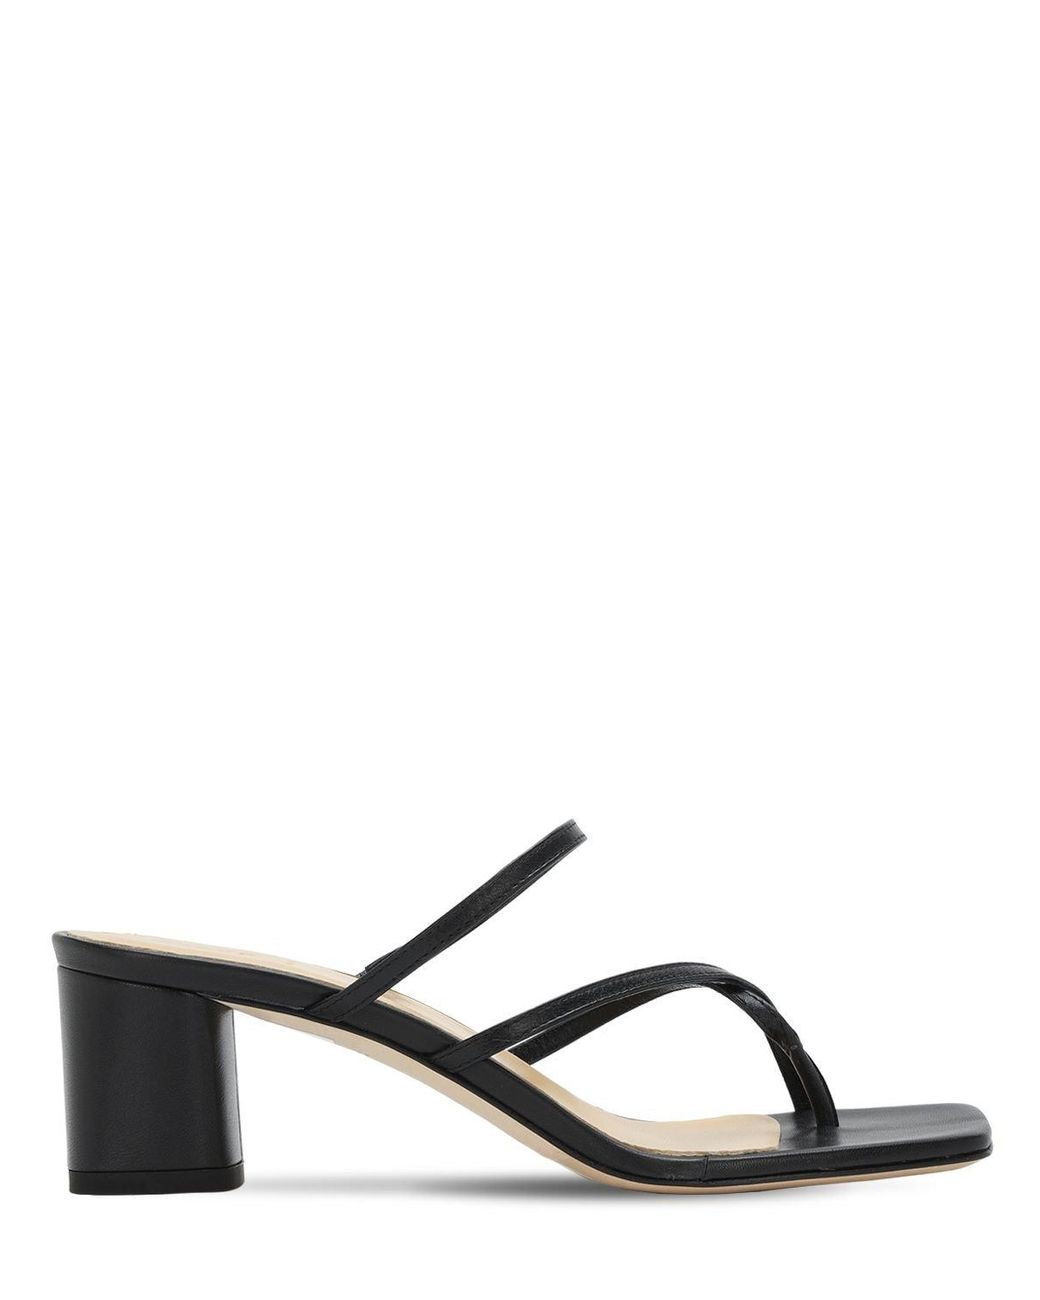 Aeyde 55mm Larissa Leather Sandals in Black - Lyst